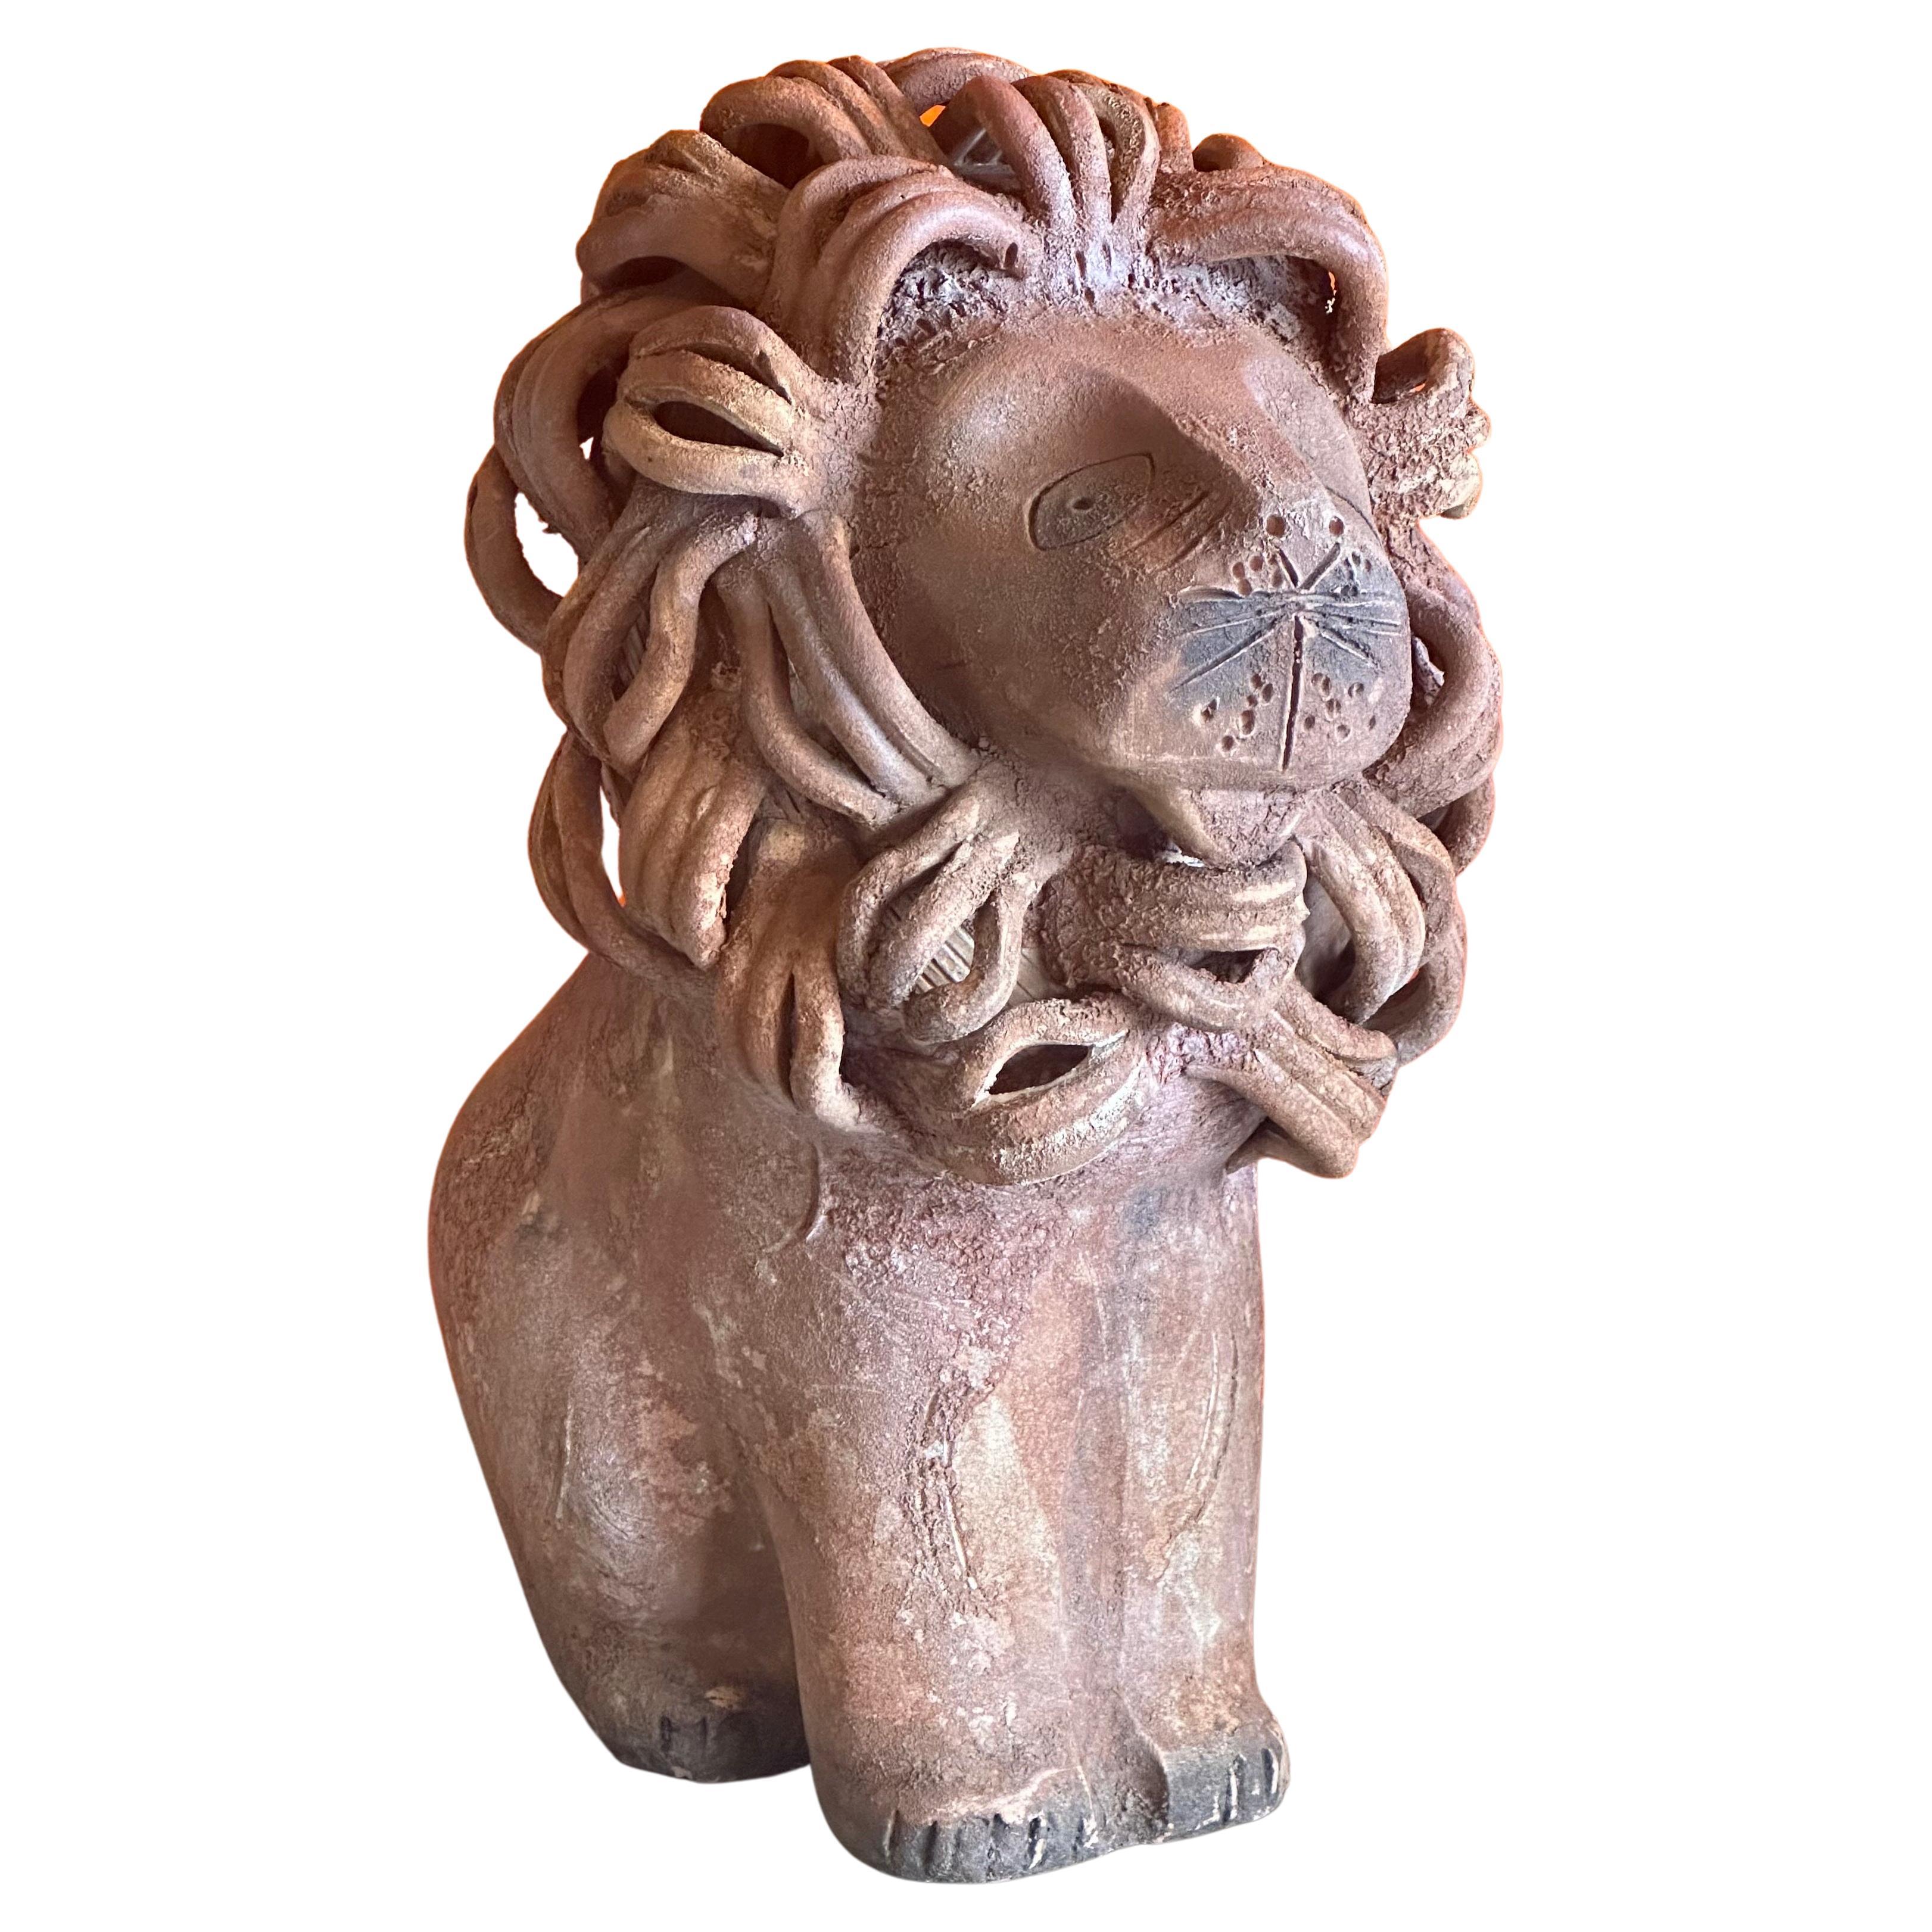 A wonderful vintage ceramiche / pottery lion sculpture by Aldo Londi for Bitossi Raymor, circa 1960s. The piece is in very good vintage condition with a brown rustic terra cota like finish and texture.  The sculpture has great intricate detail and